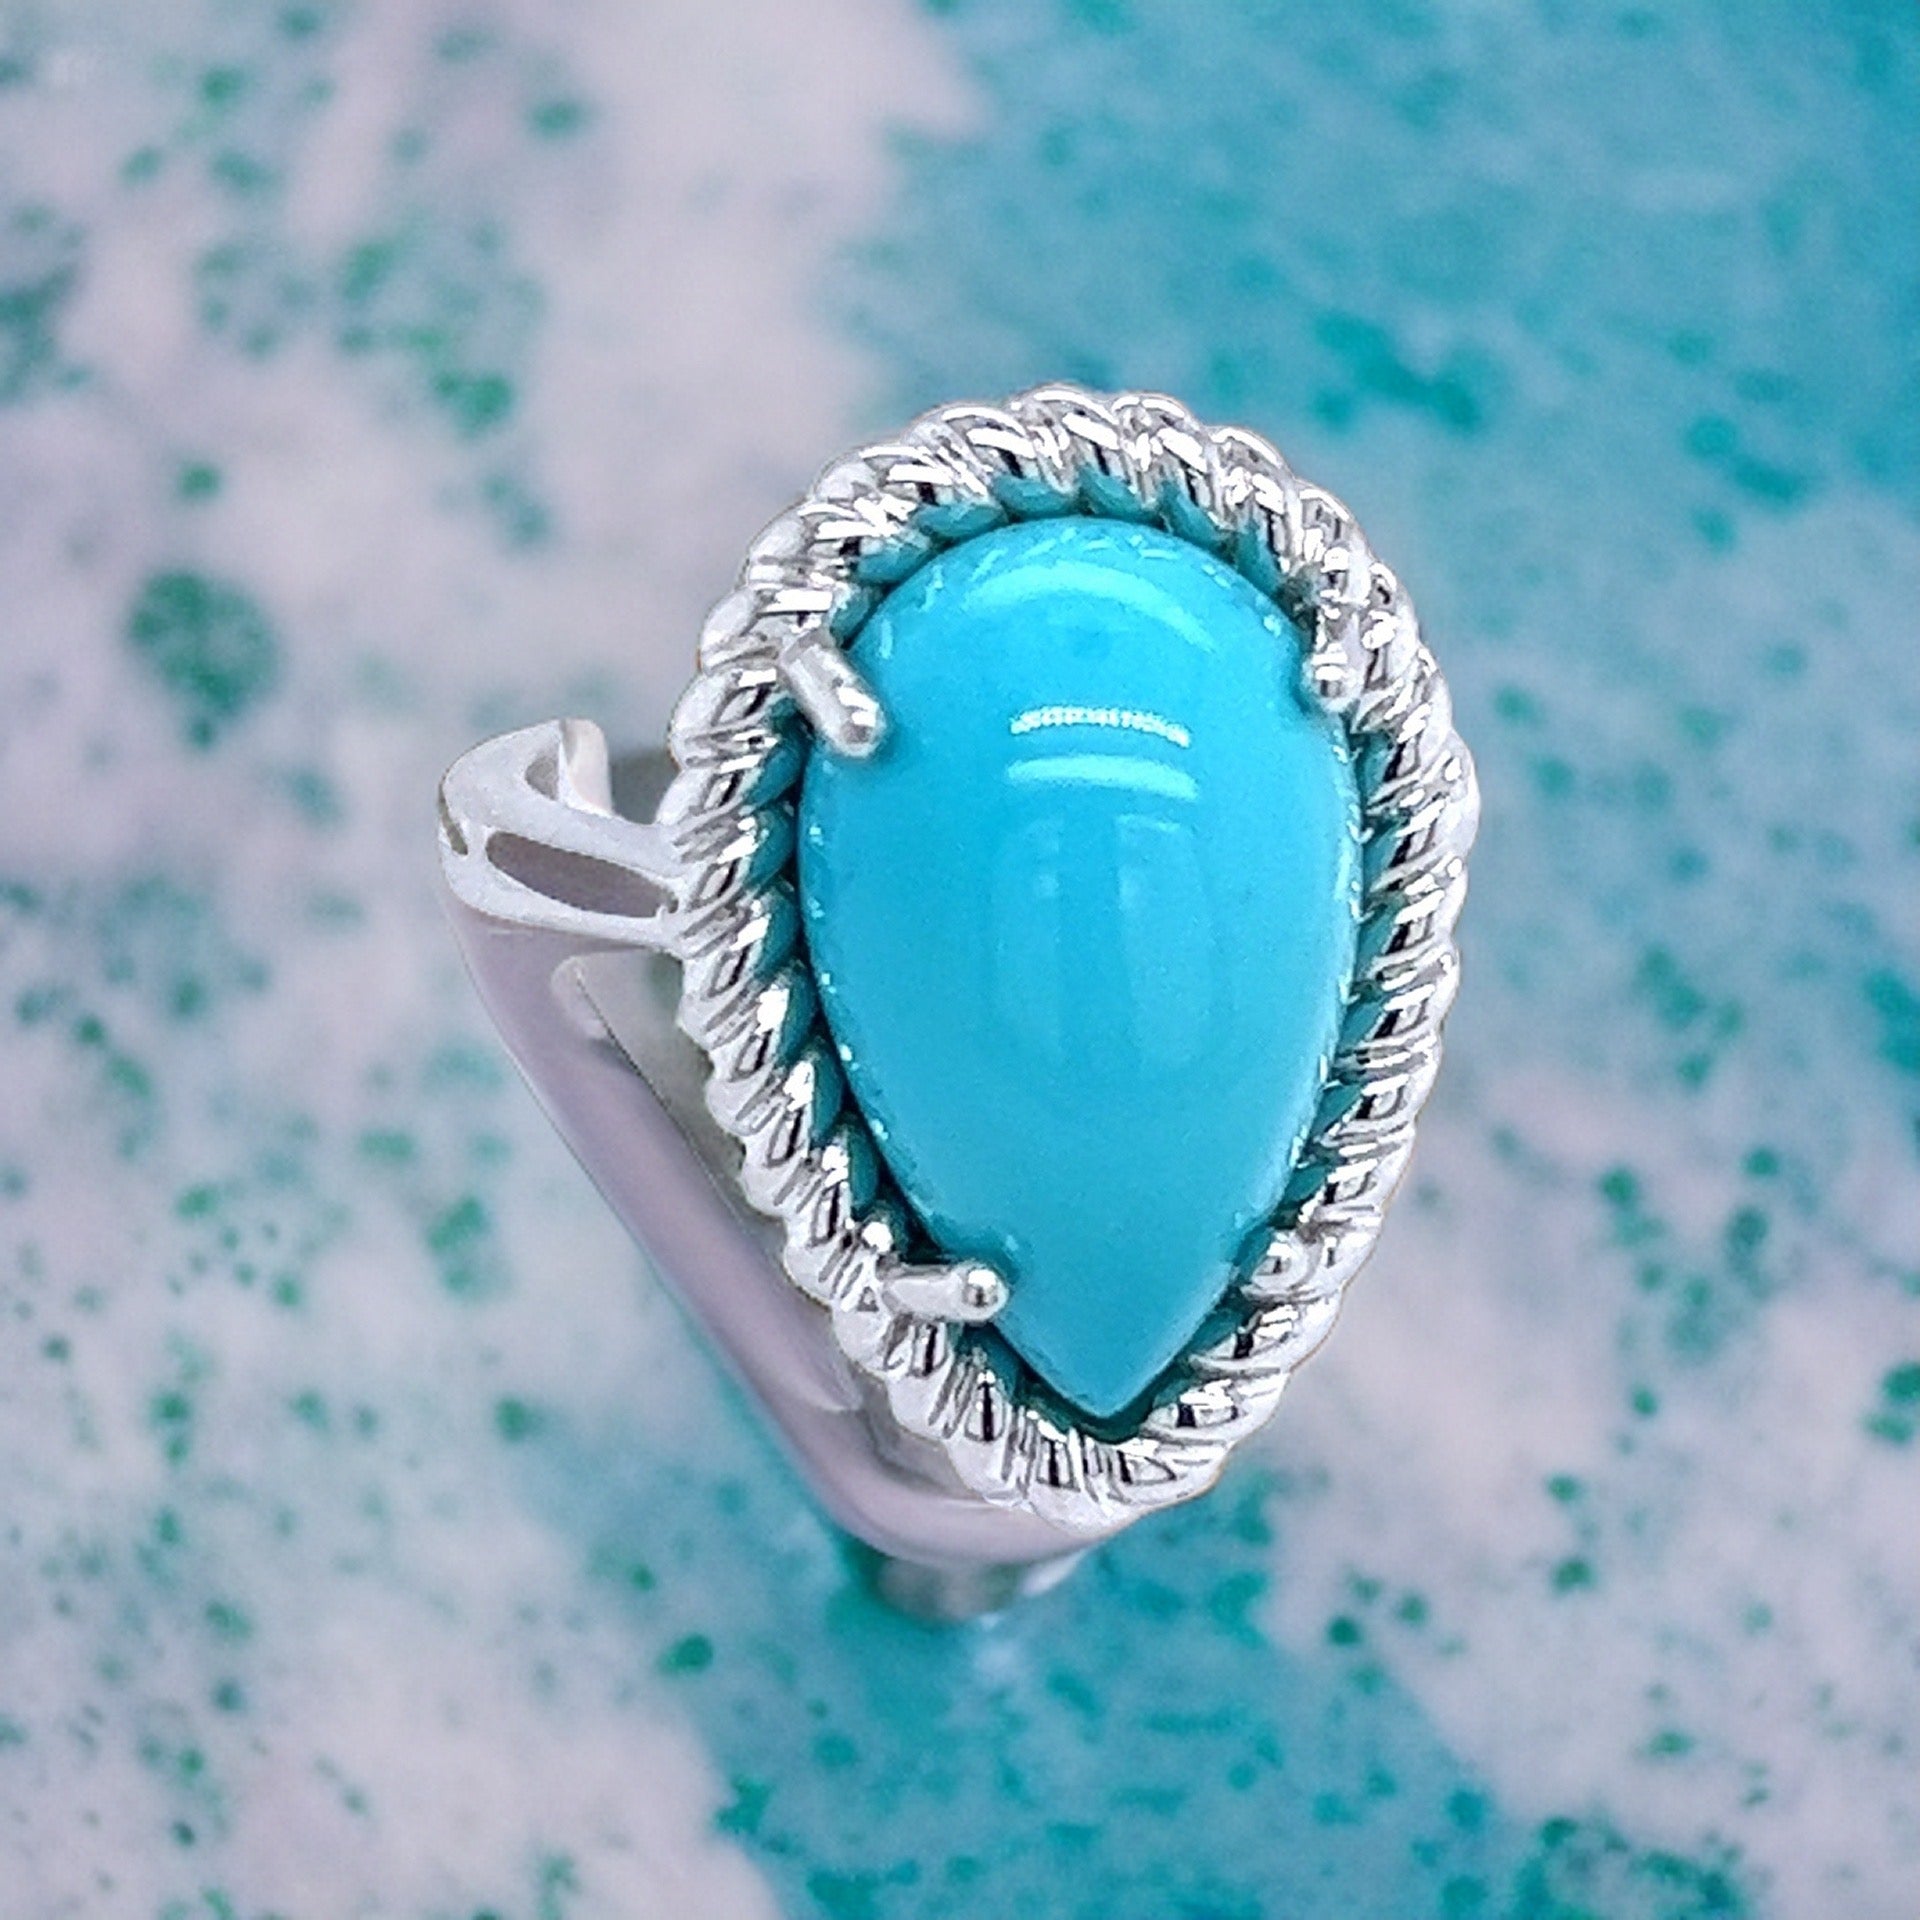 Natural Persian Turquoise Ring Size 6 14k White Gold 6.21 TCW Certified $4,250 221276 - Certified Fine Jewelry